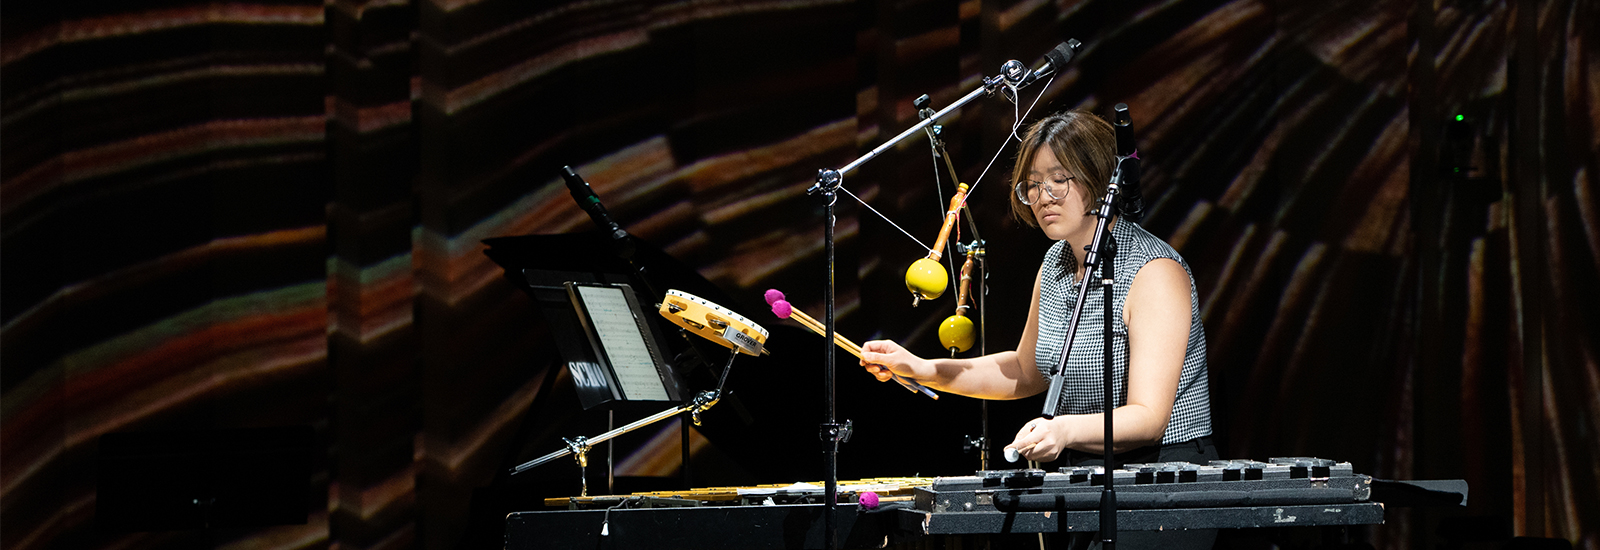 Yi-Mei Ciou, Frost School of Music percussion student pursuing a Doctor of Musical Arts